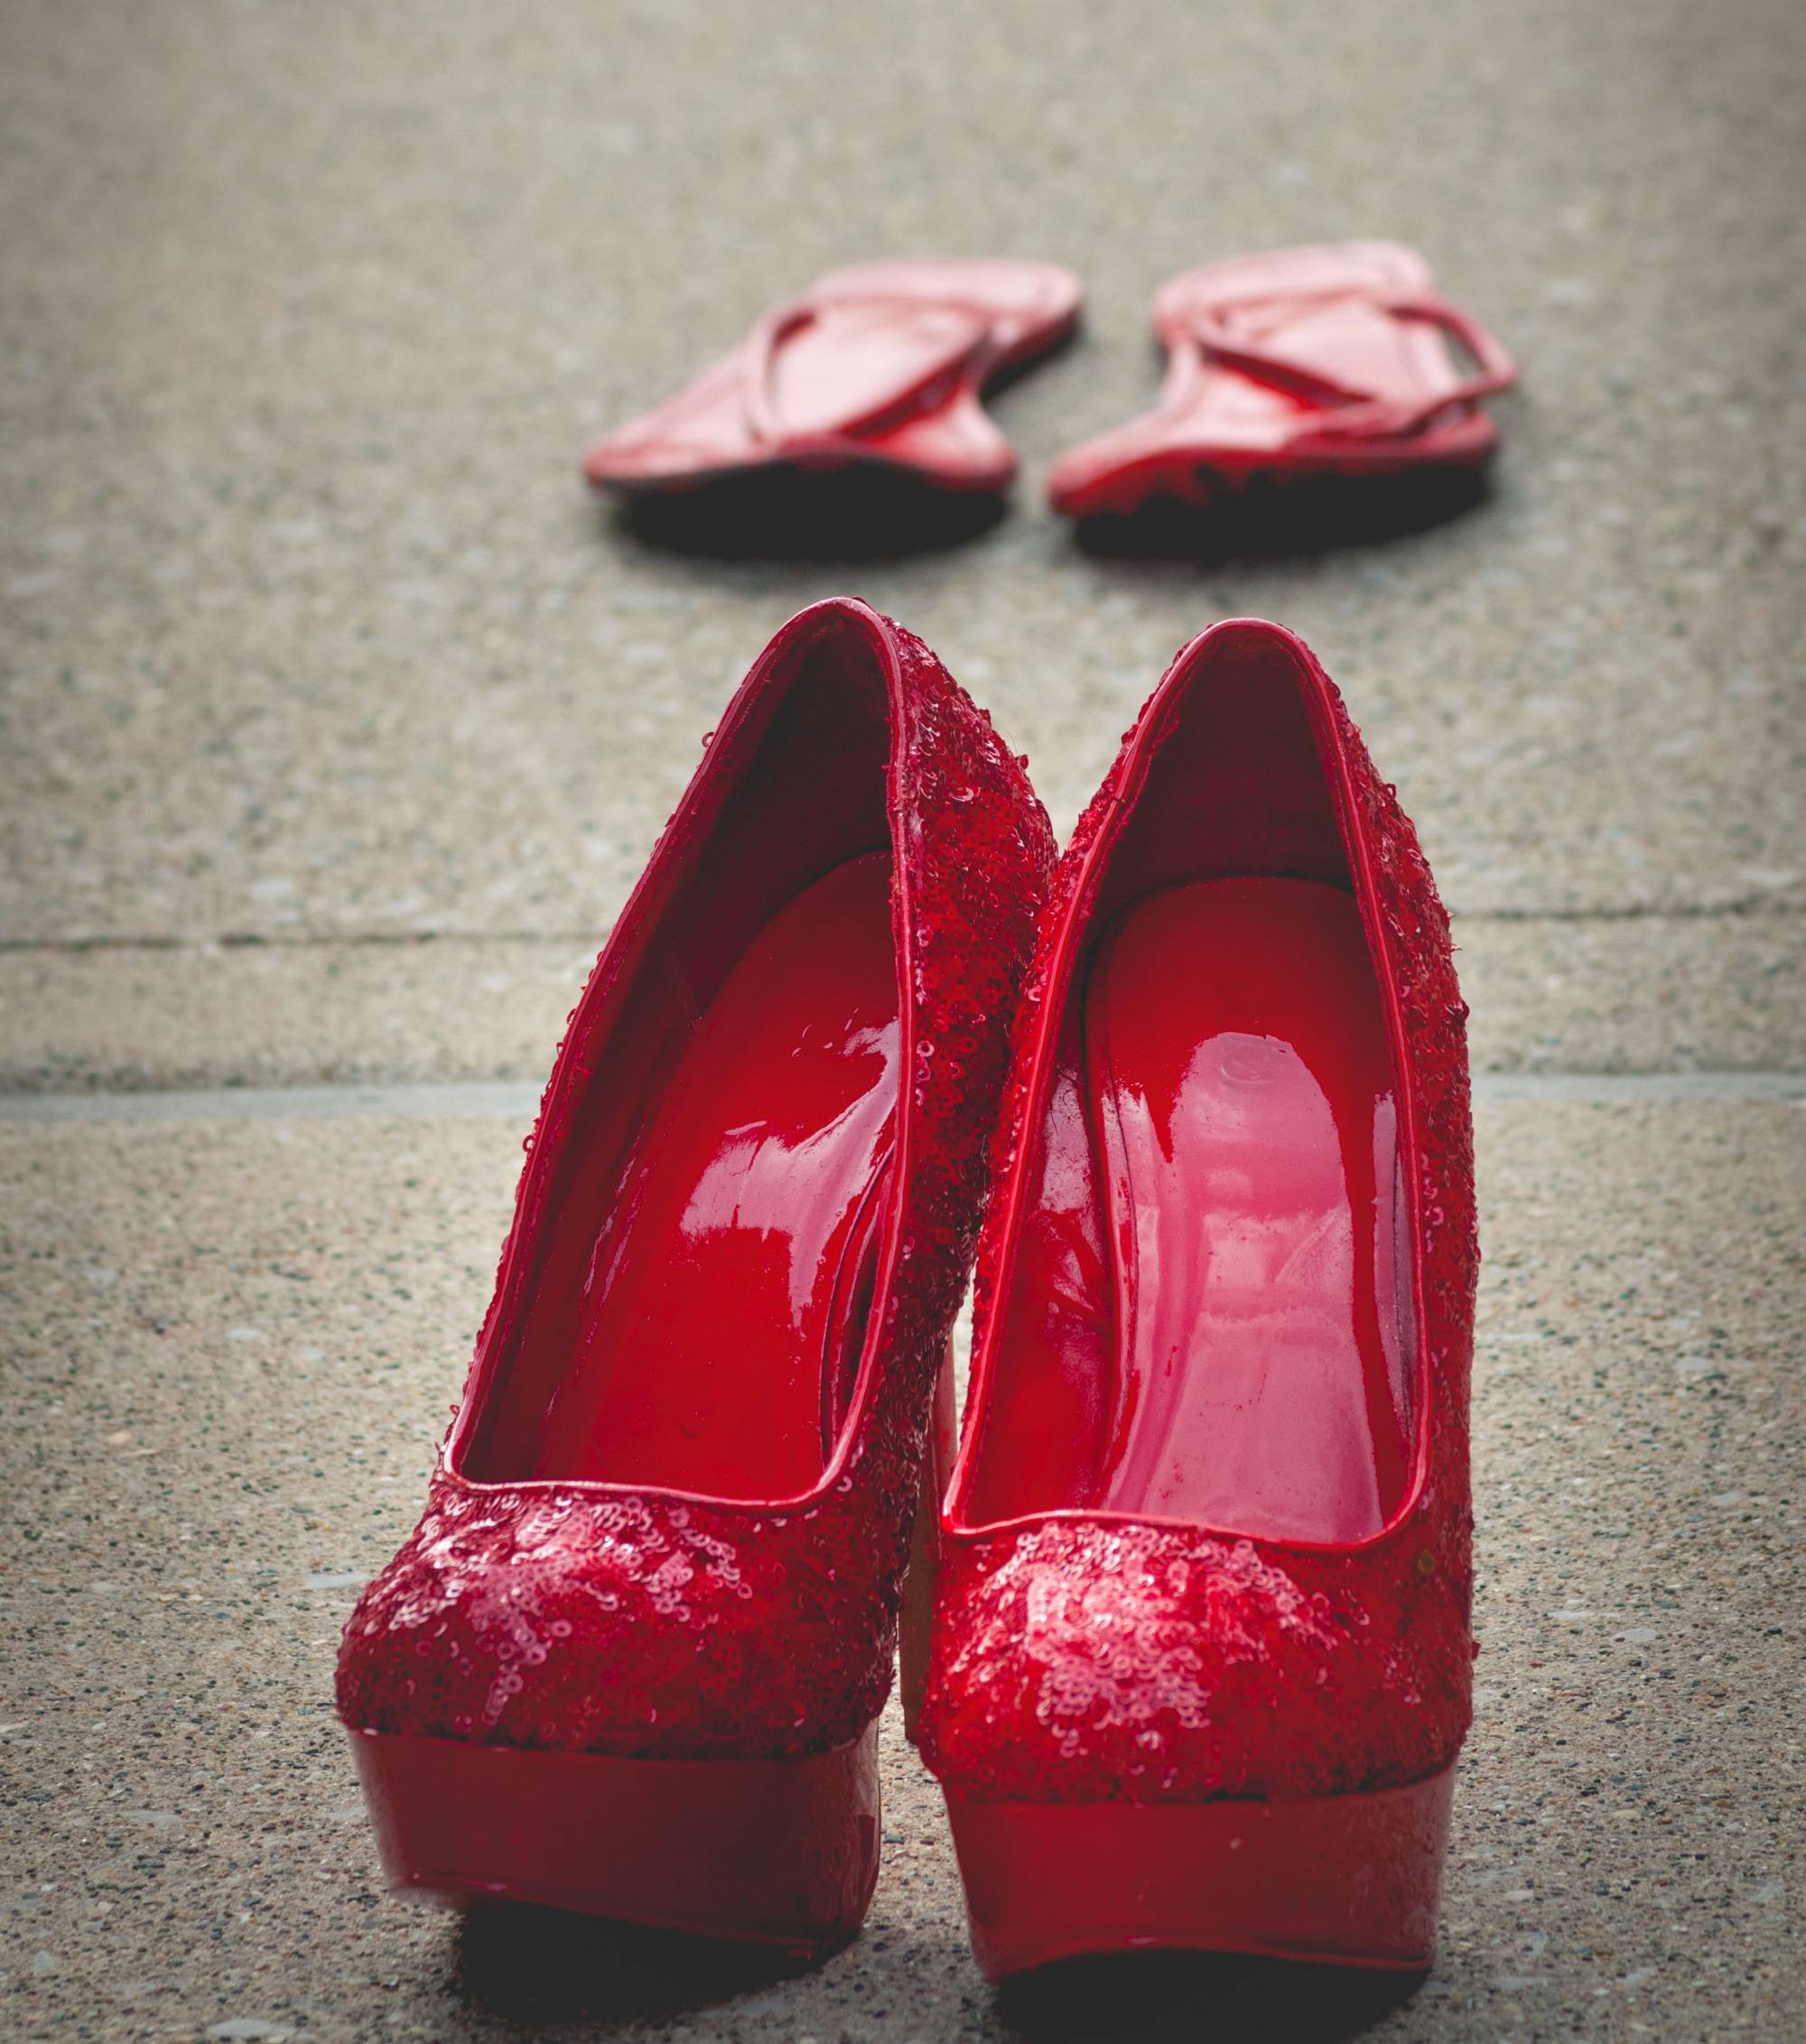 Pair of sequin heels painted red, sitting on pavement in courtyard